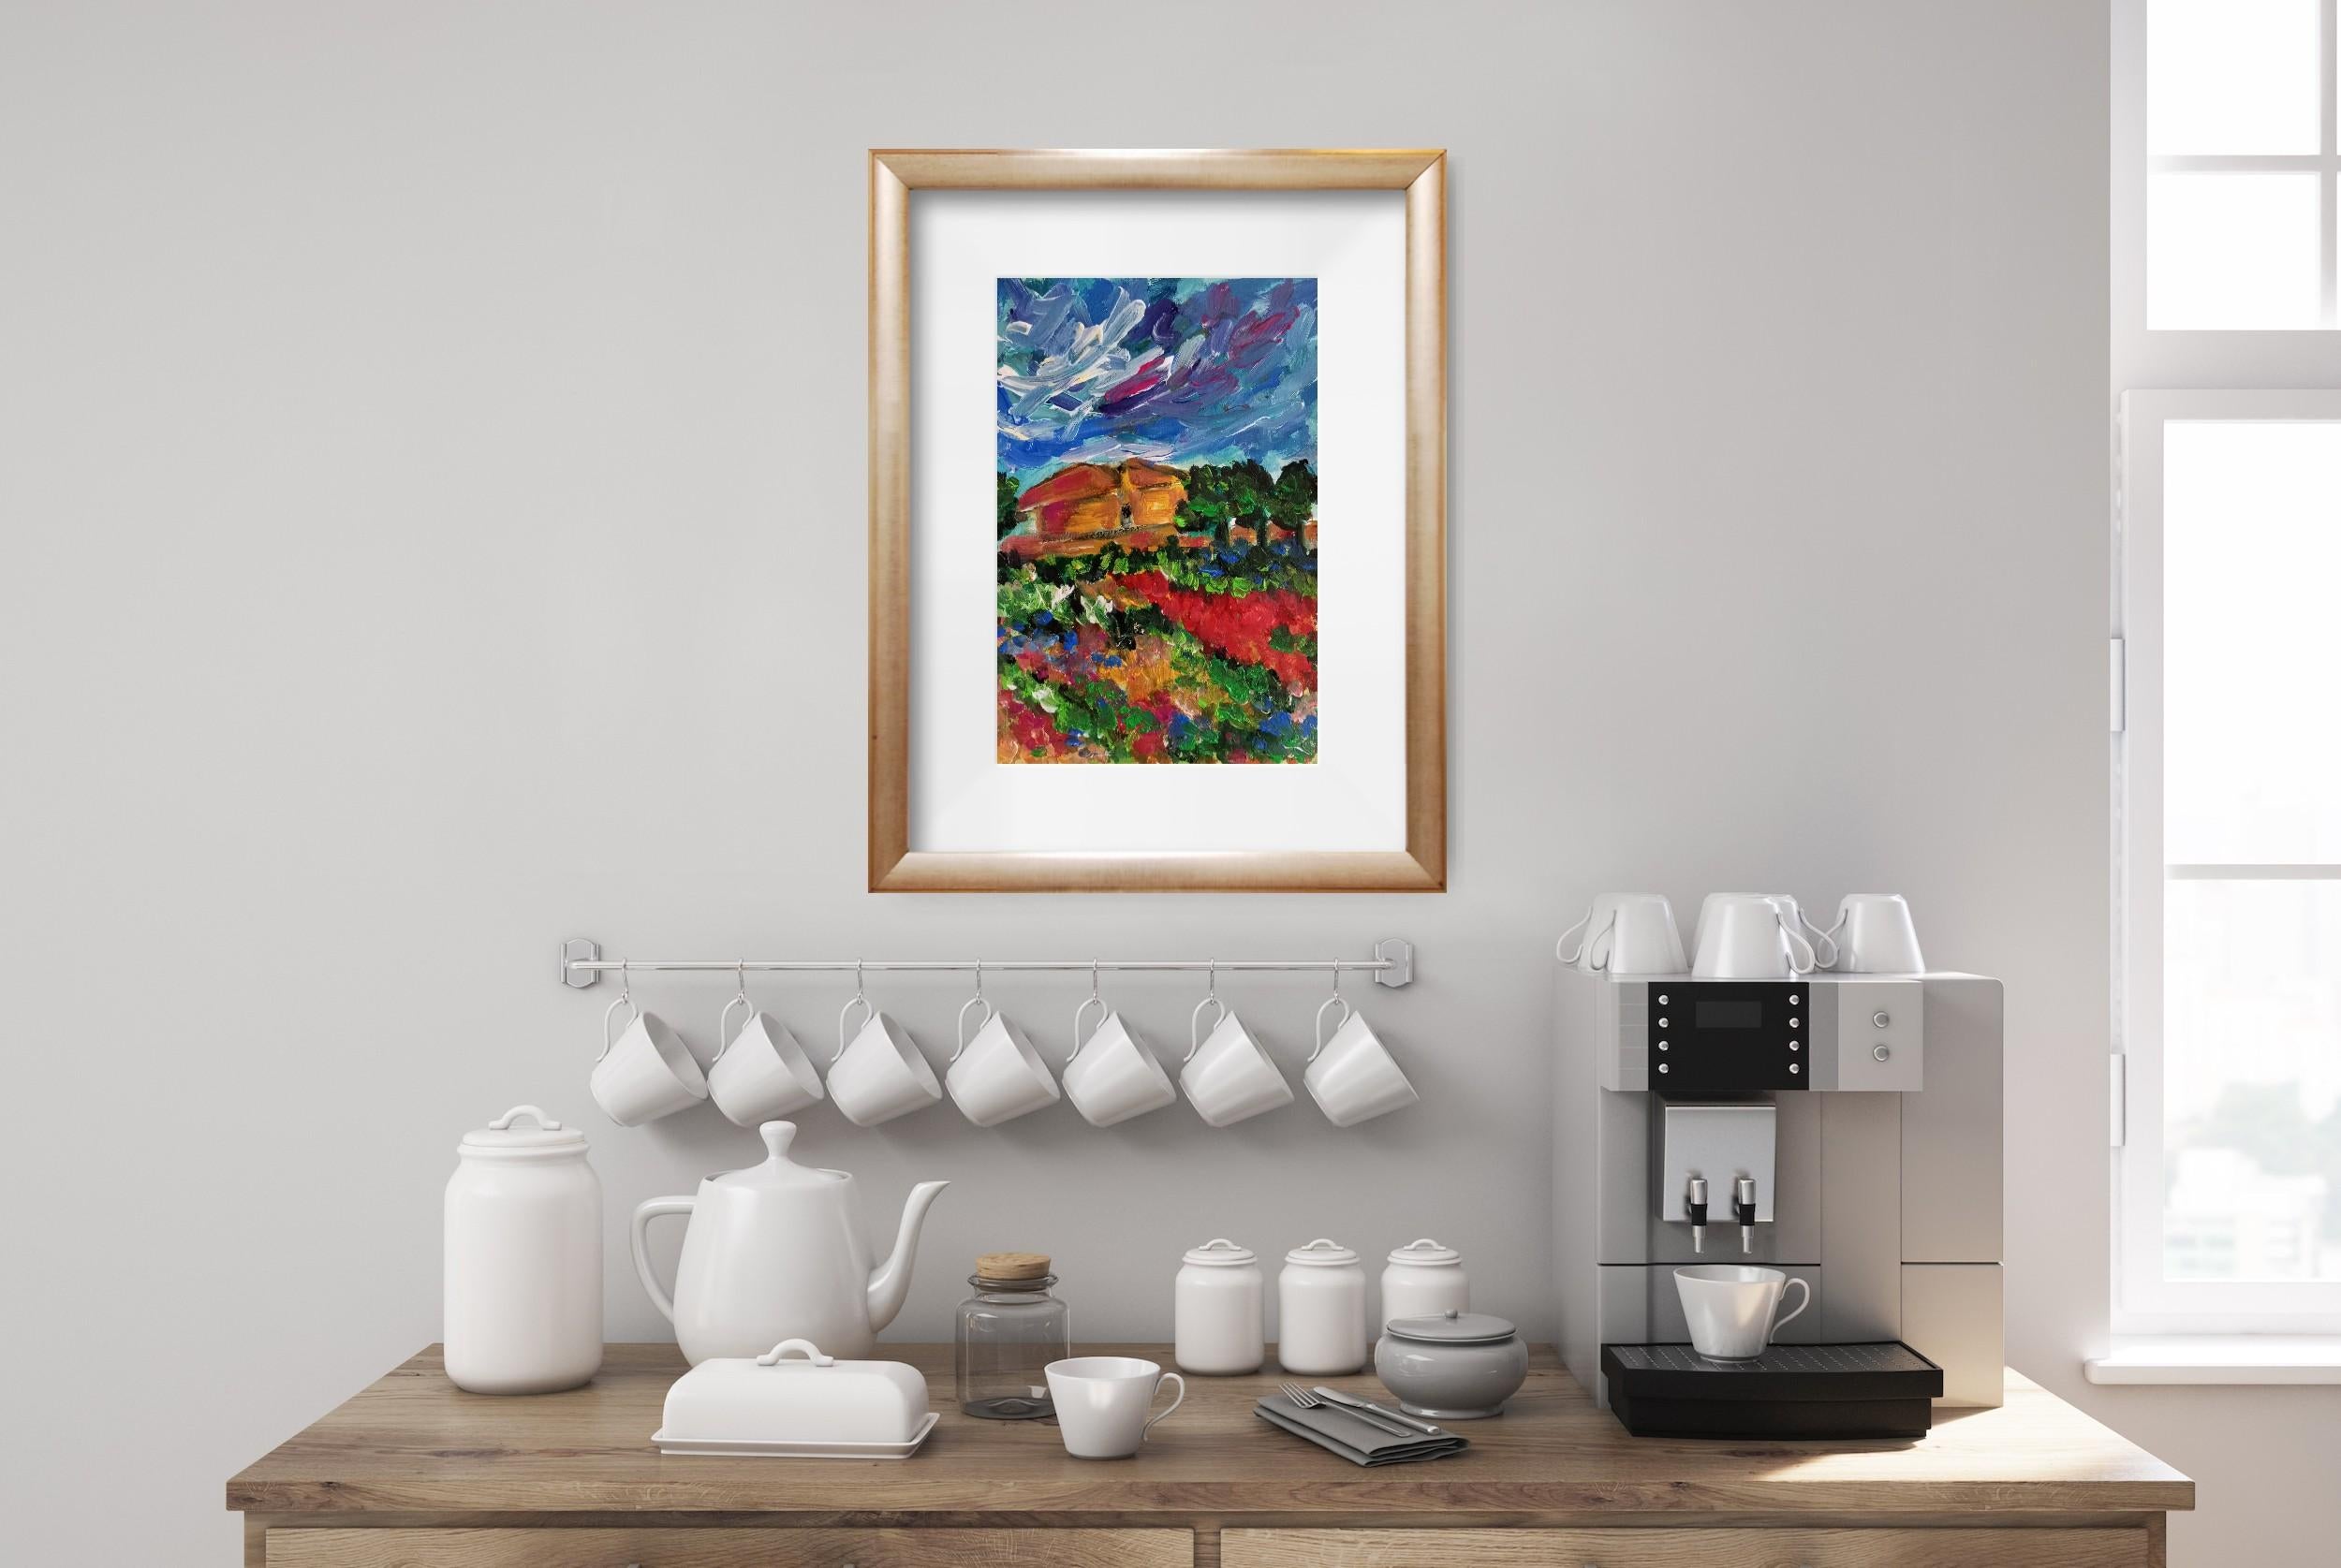 
In my art practice I love to use bright colors which boldly contrast with complementary colors so I could get unusual original compositions and structures.

The objective of this artpiece was to capture the beauty of nature by using vibrant color